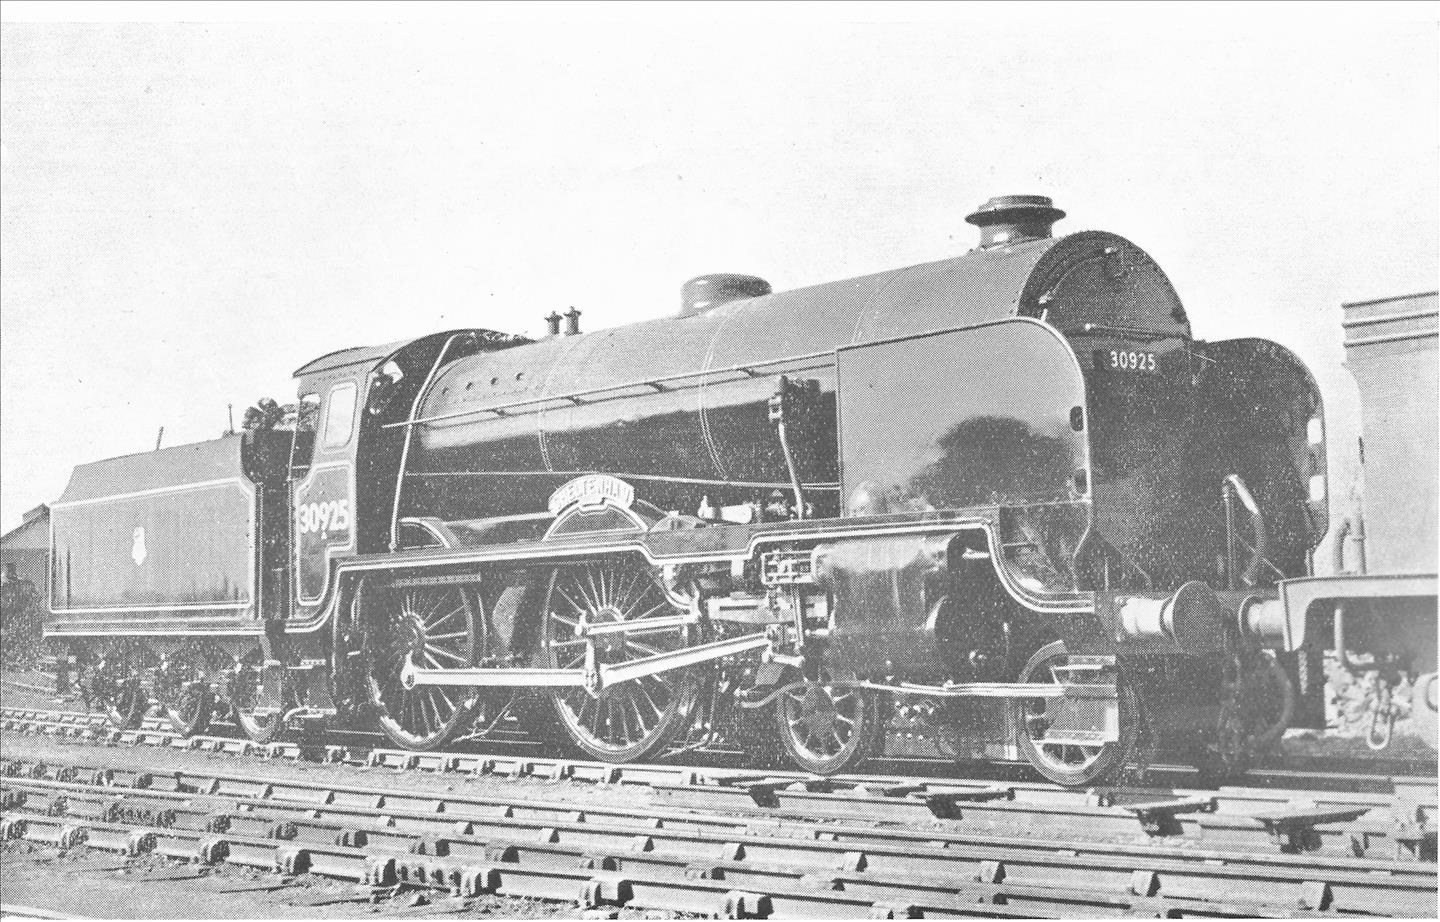 30925 in lined black livery, ex-Eastleigh Works. May 1950. W. Gilburt